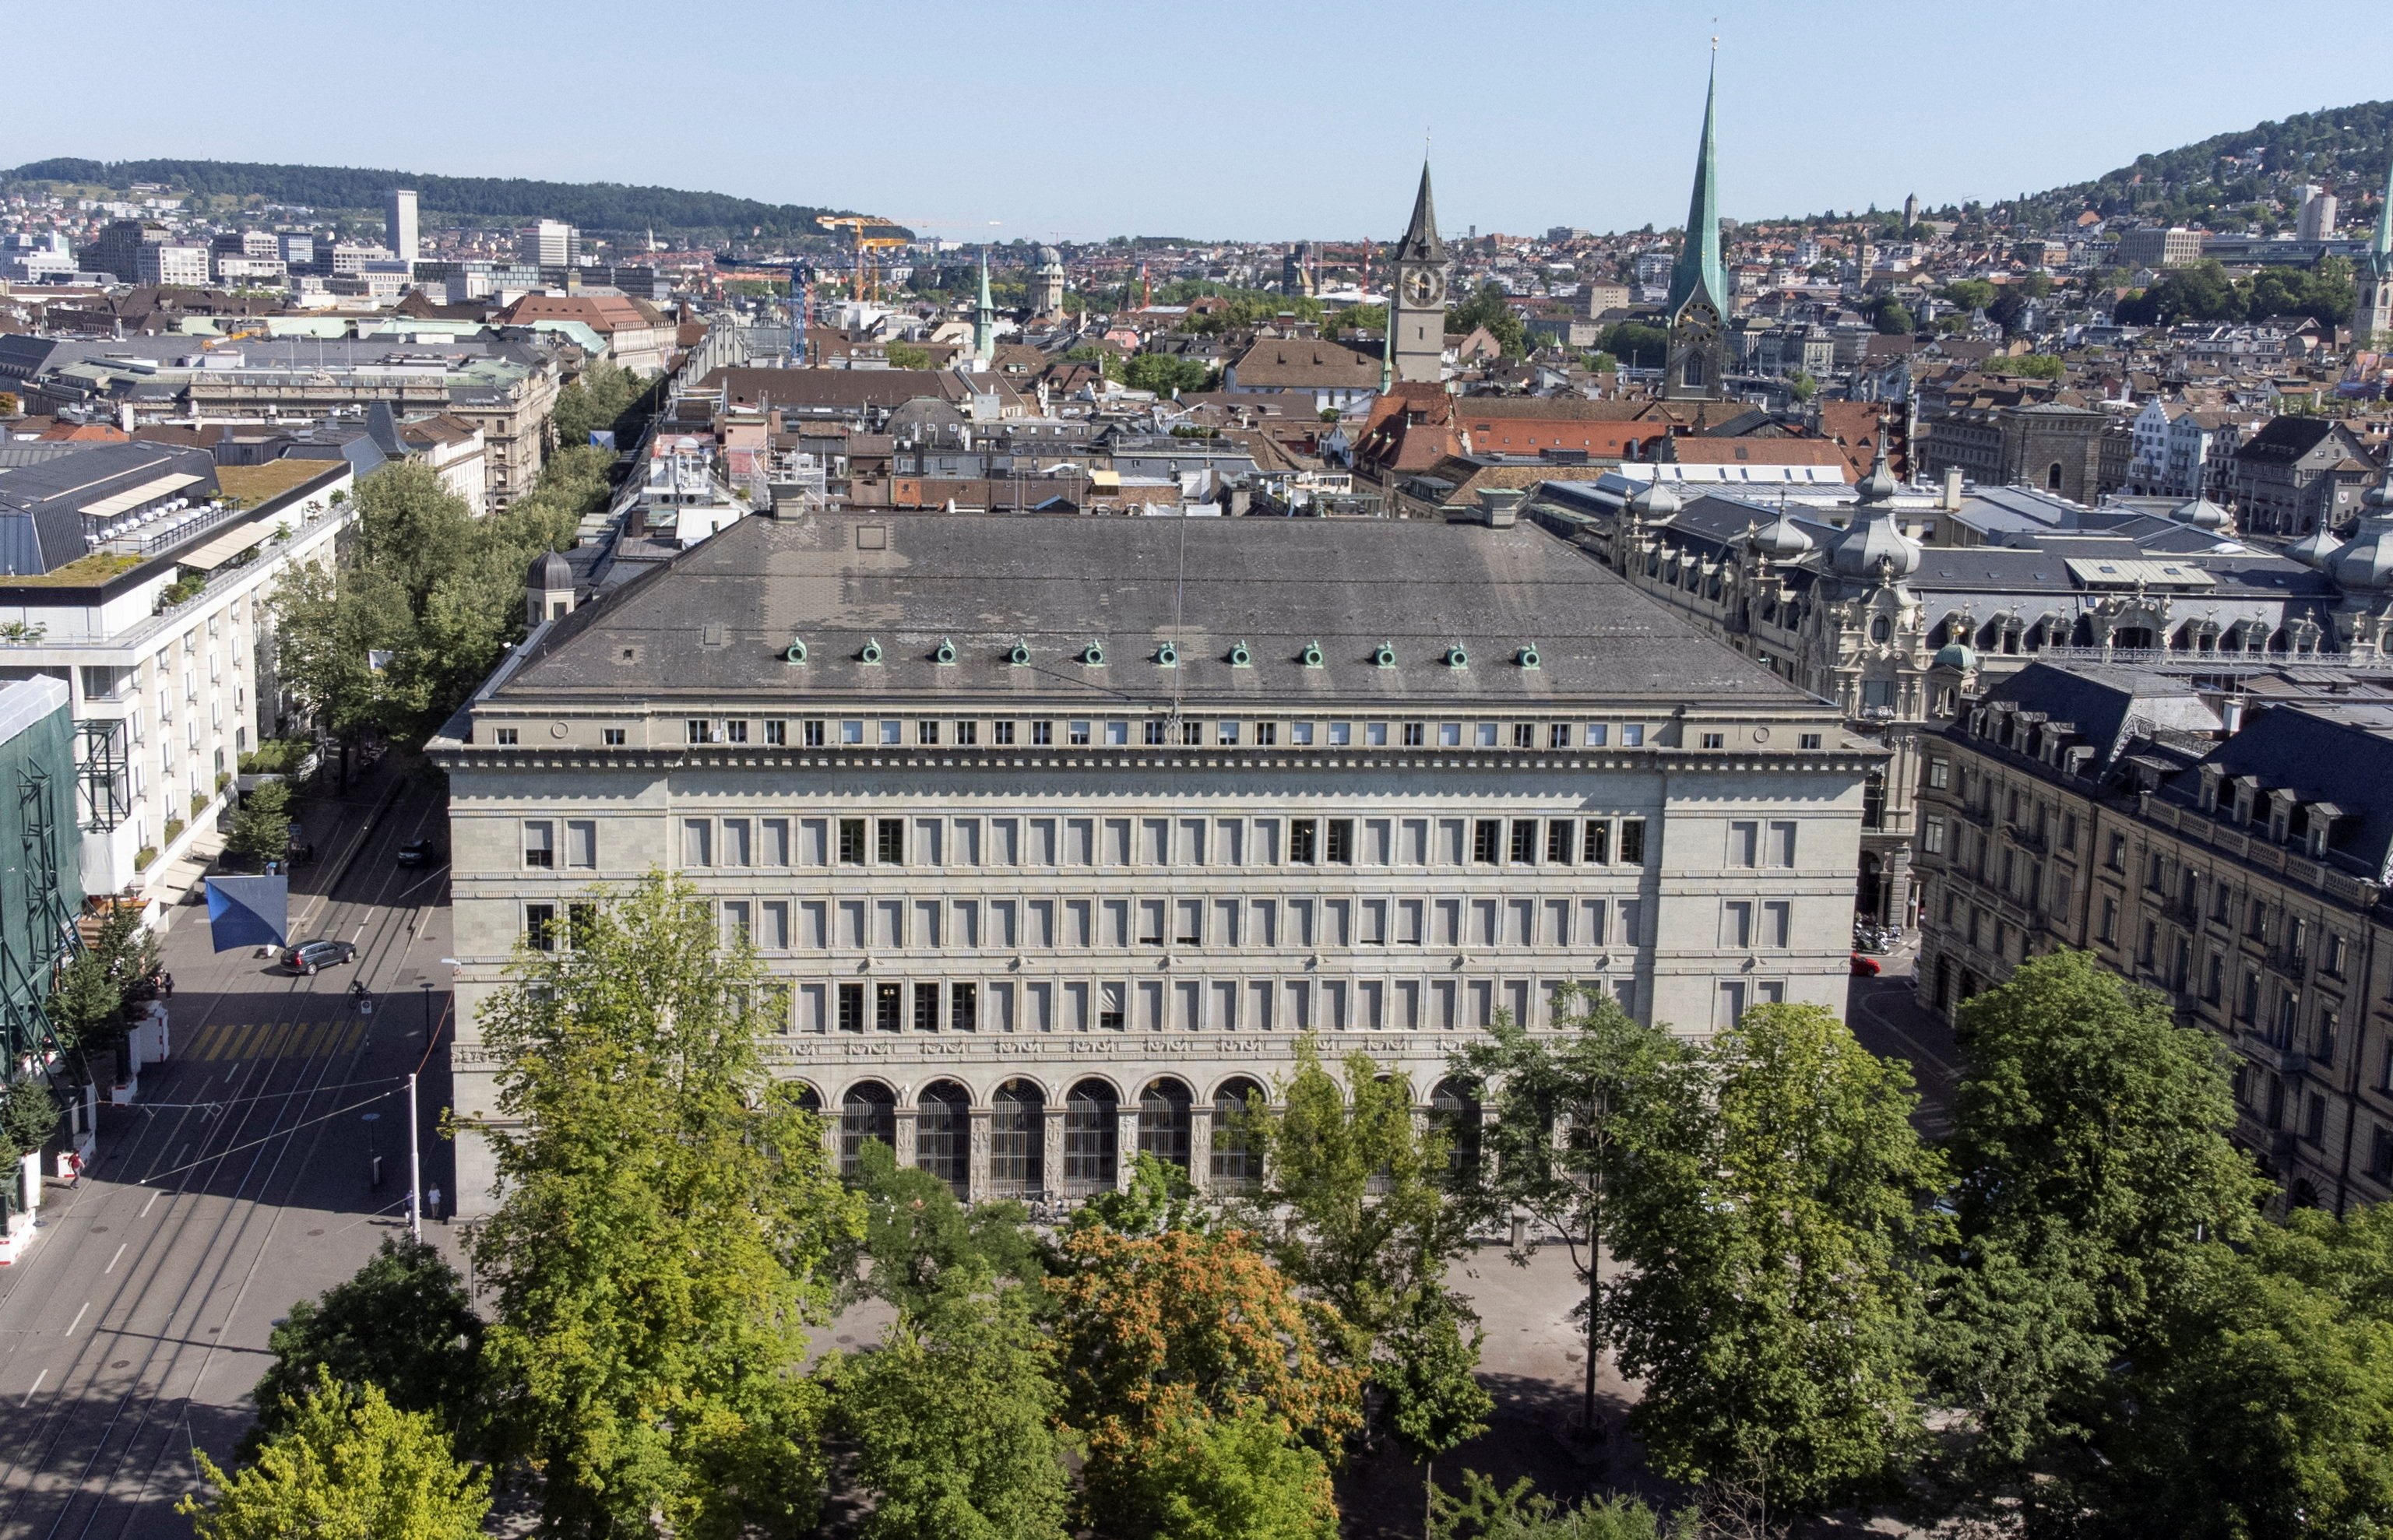 General view of the Swiss National Bank (SNB) in Zurich